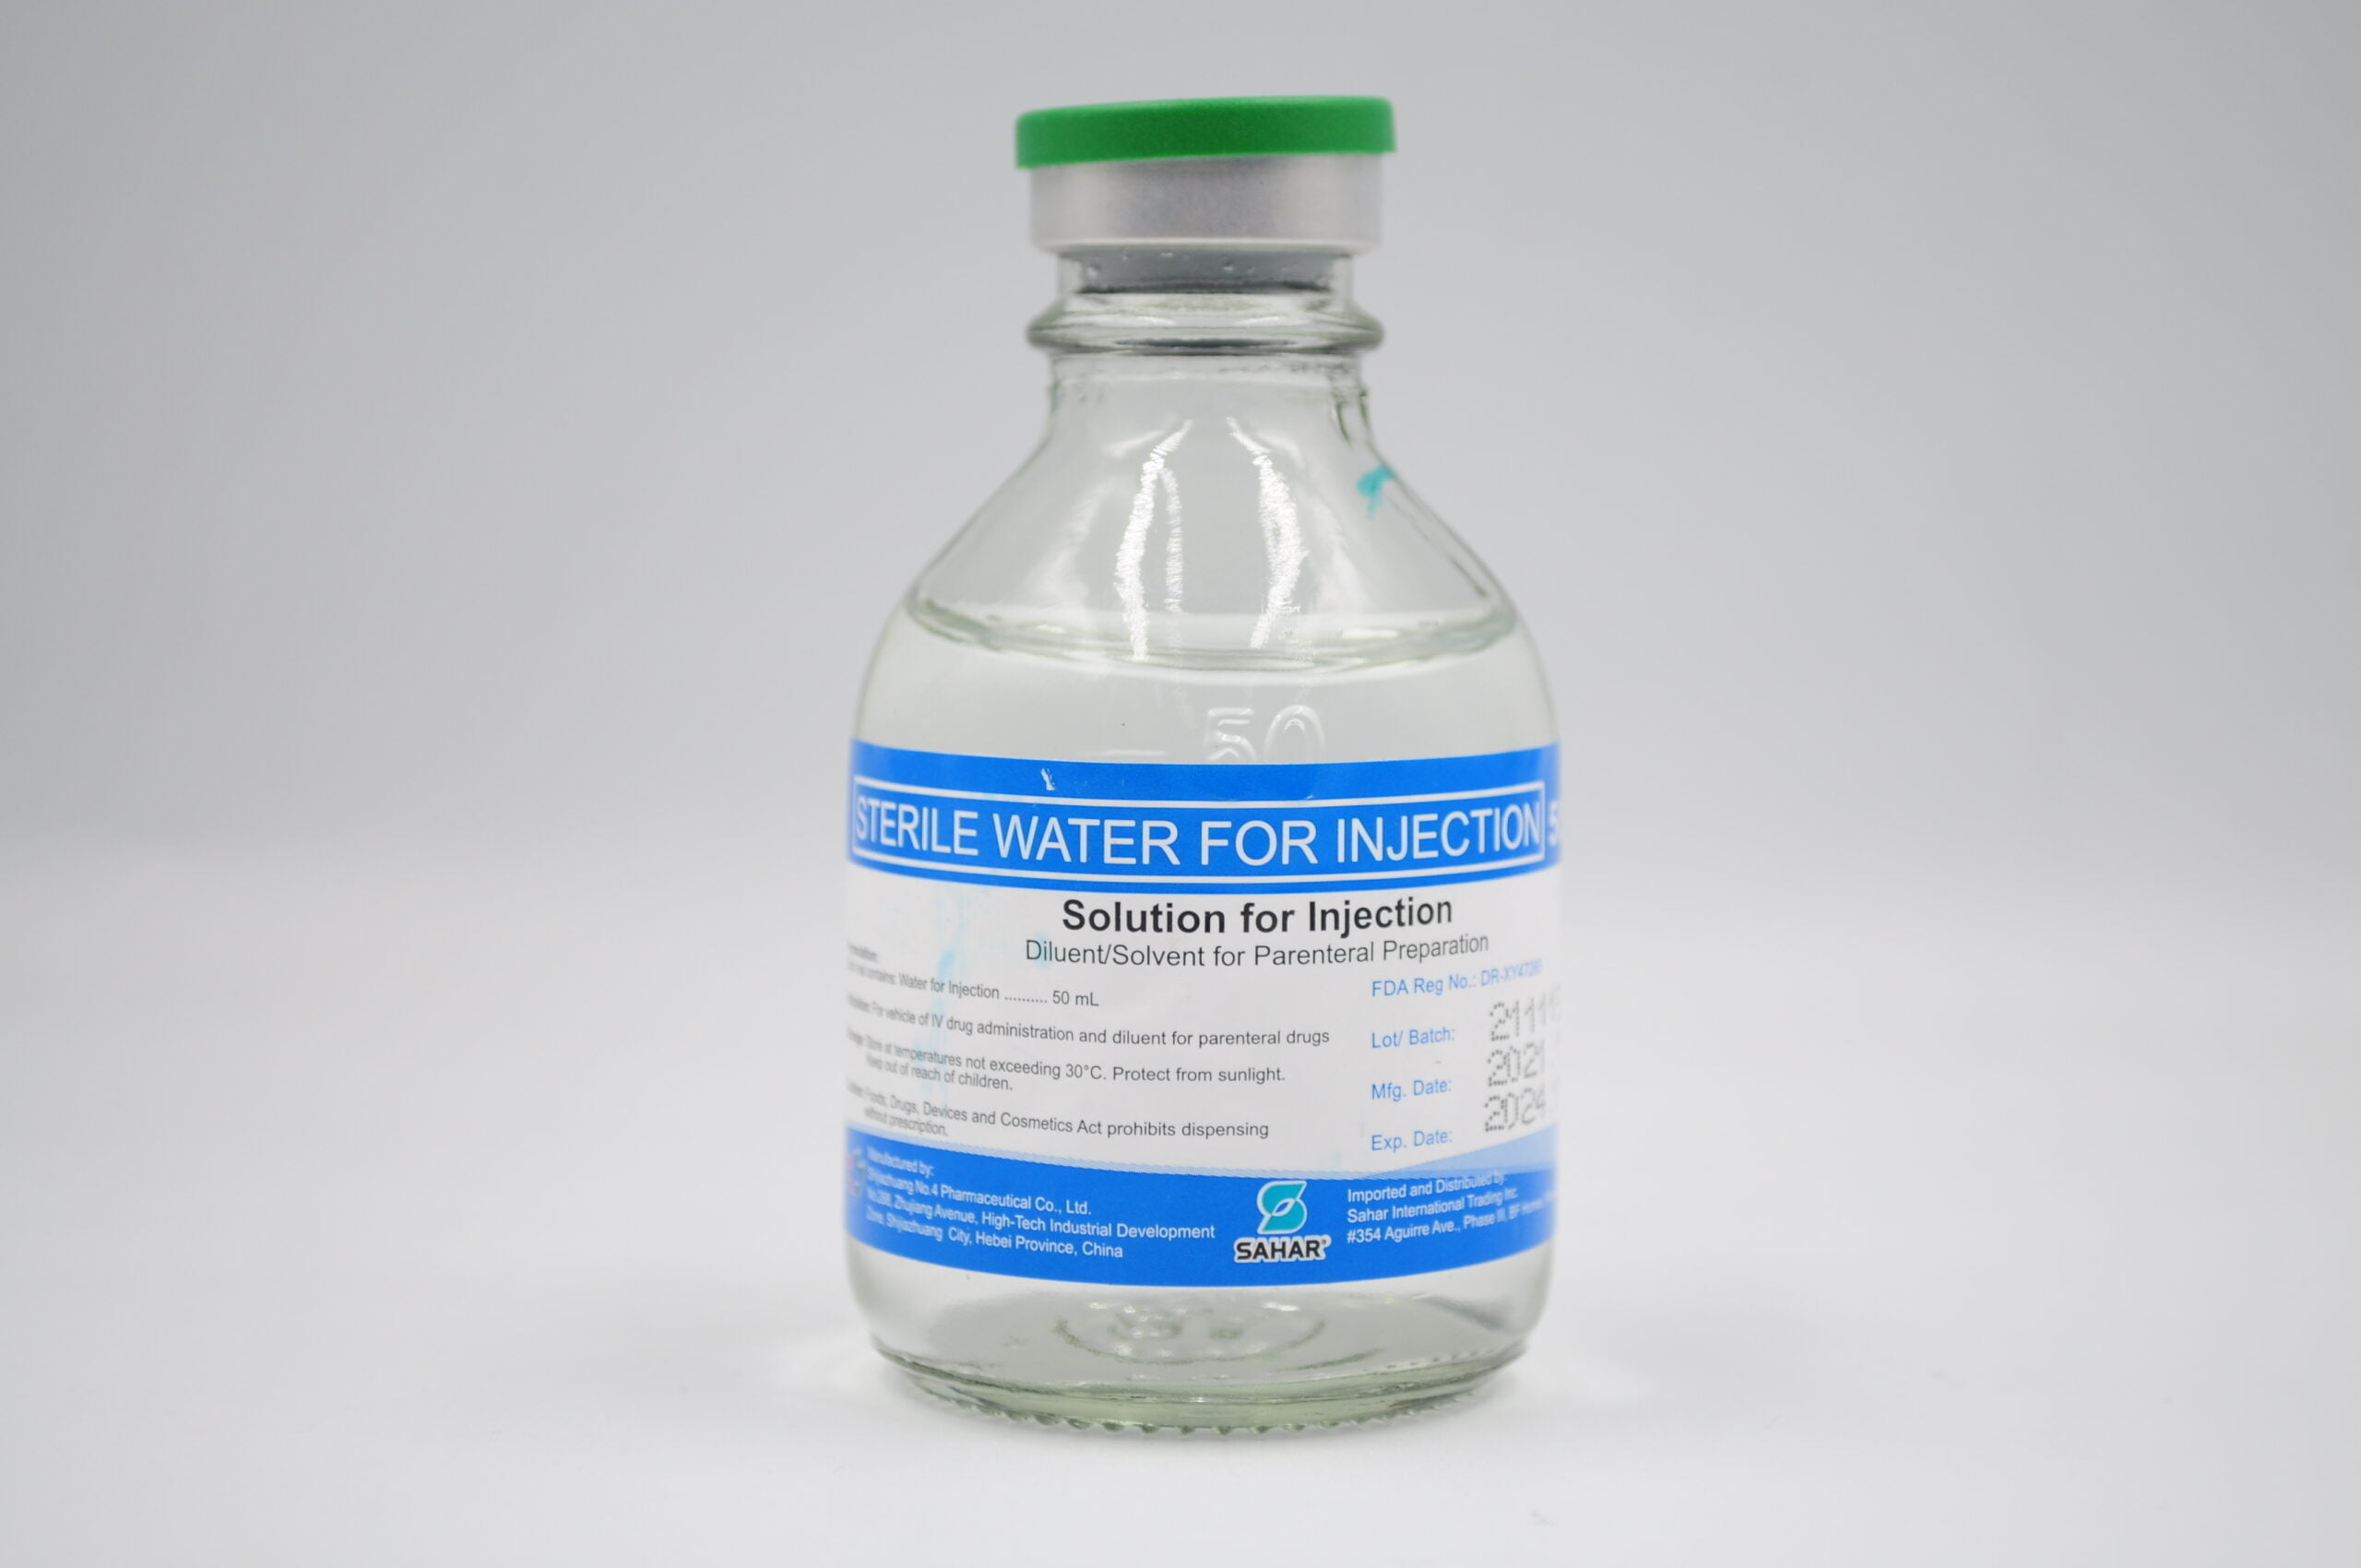 Sterile Water for Injection 50mL Glass Bottle